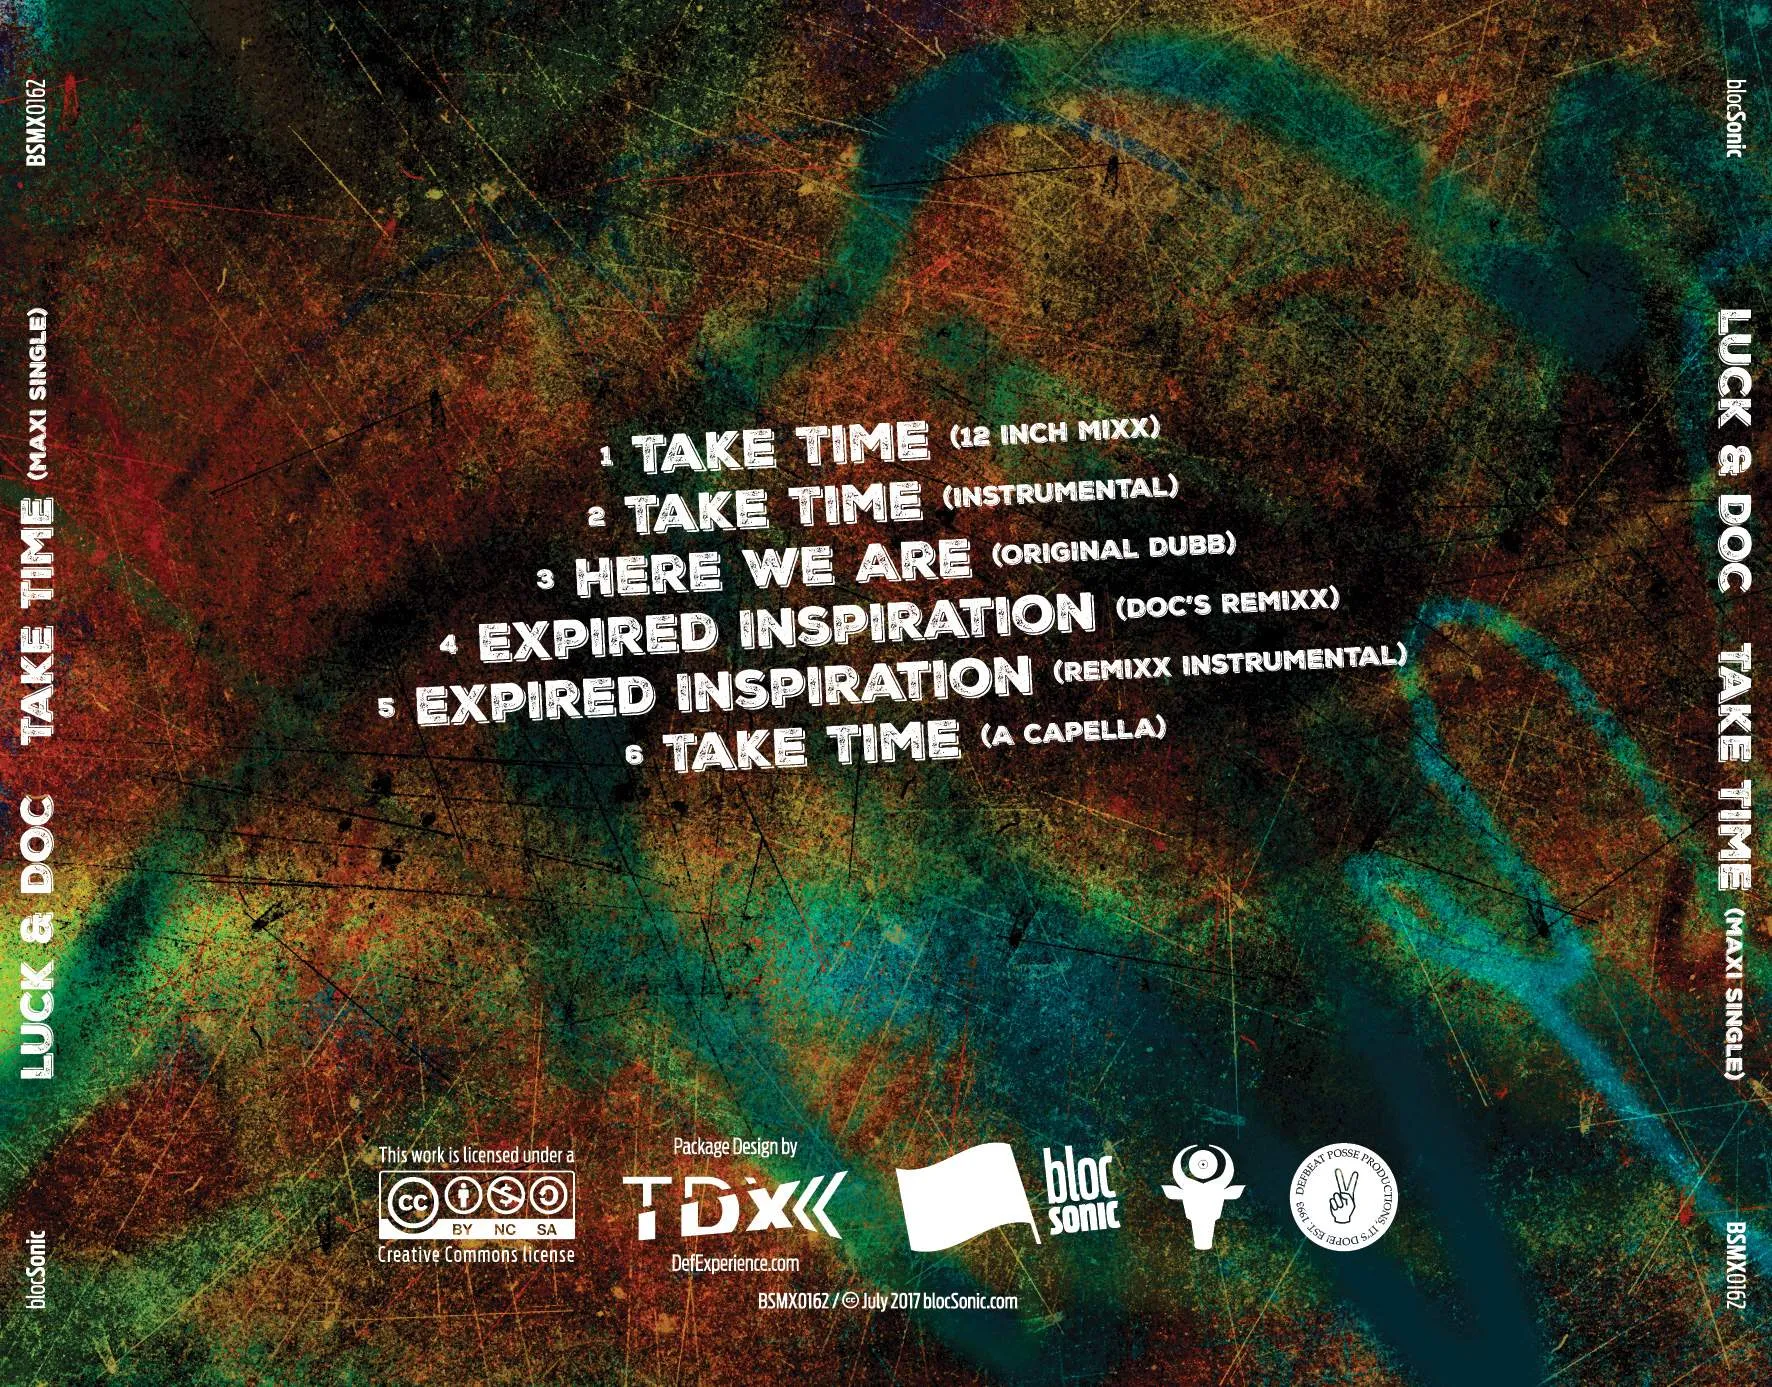 Album traycard for “Take Time (Maxi Single)” by Luck &amp; Doc